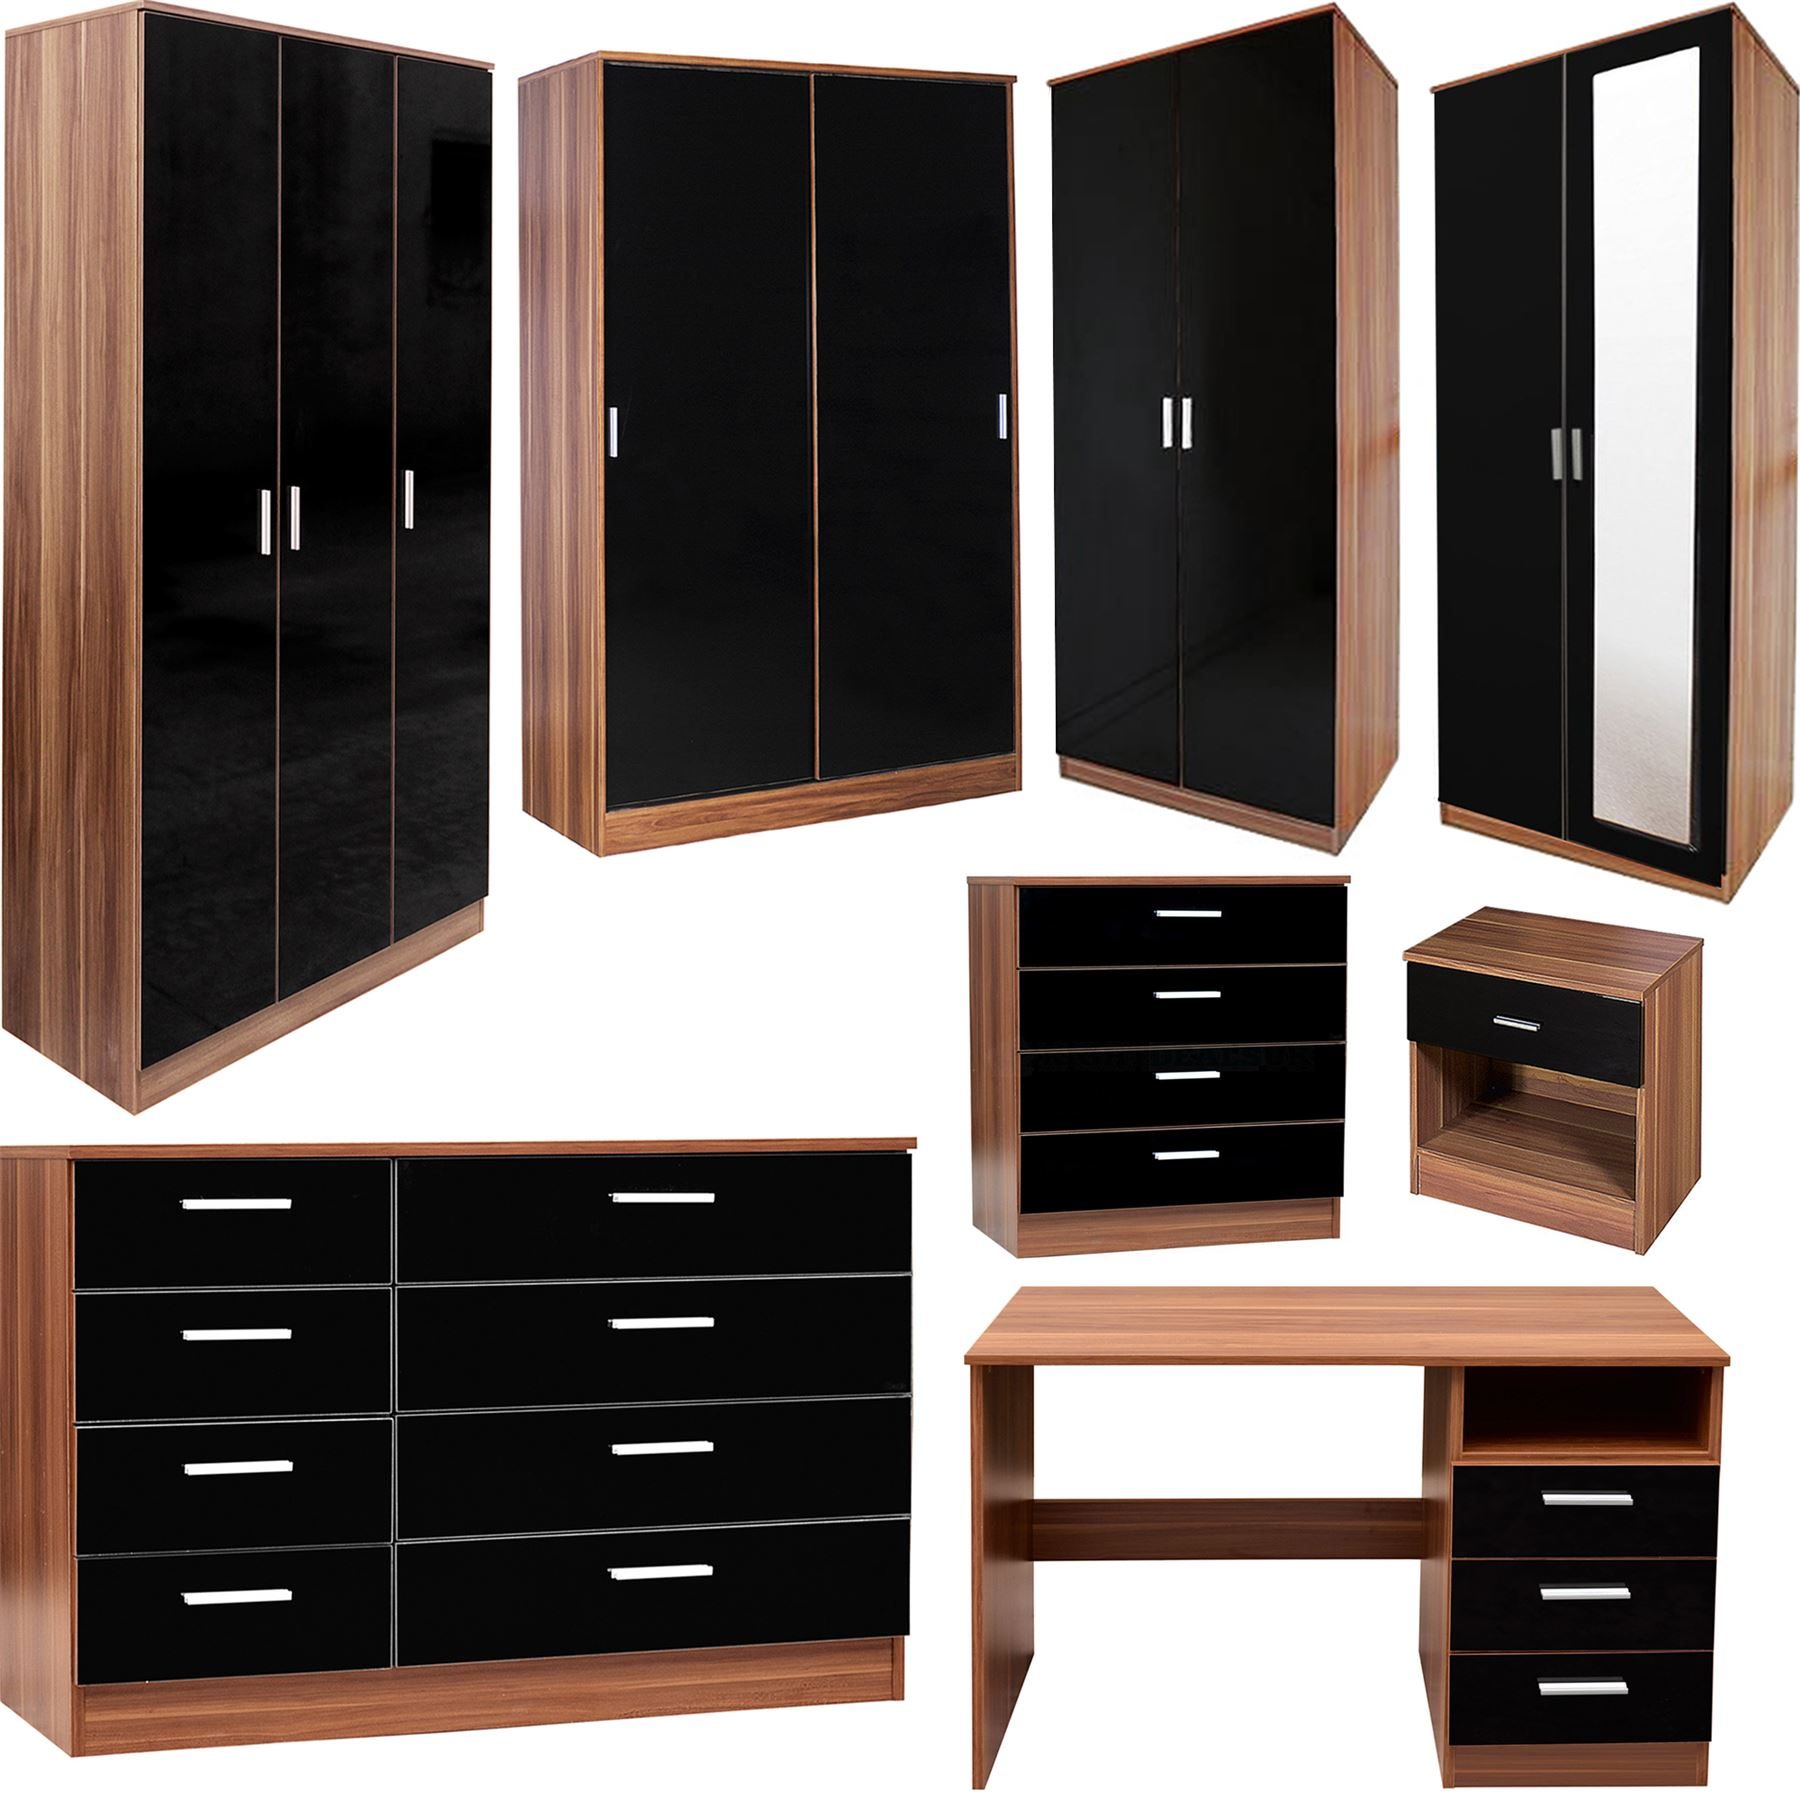 Details About Bedroom Furniture 3 Piece Set Black Gloss Walnut Wardrobe Bedside Drawer Chest with regard to proportions 1800 X 1800